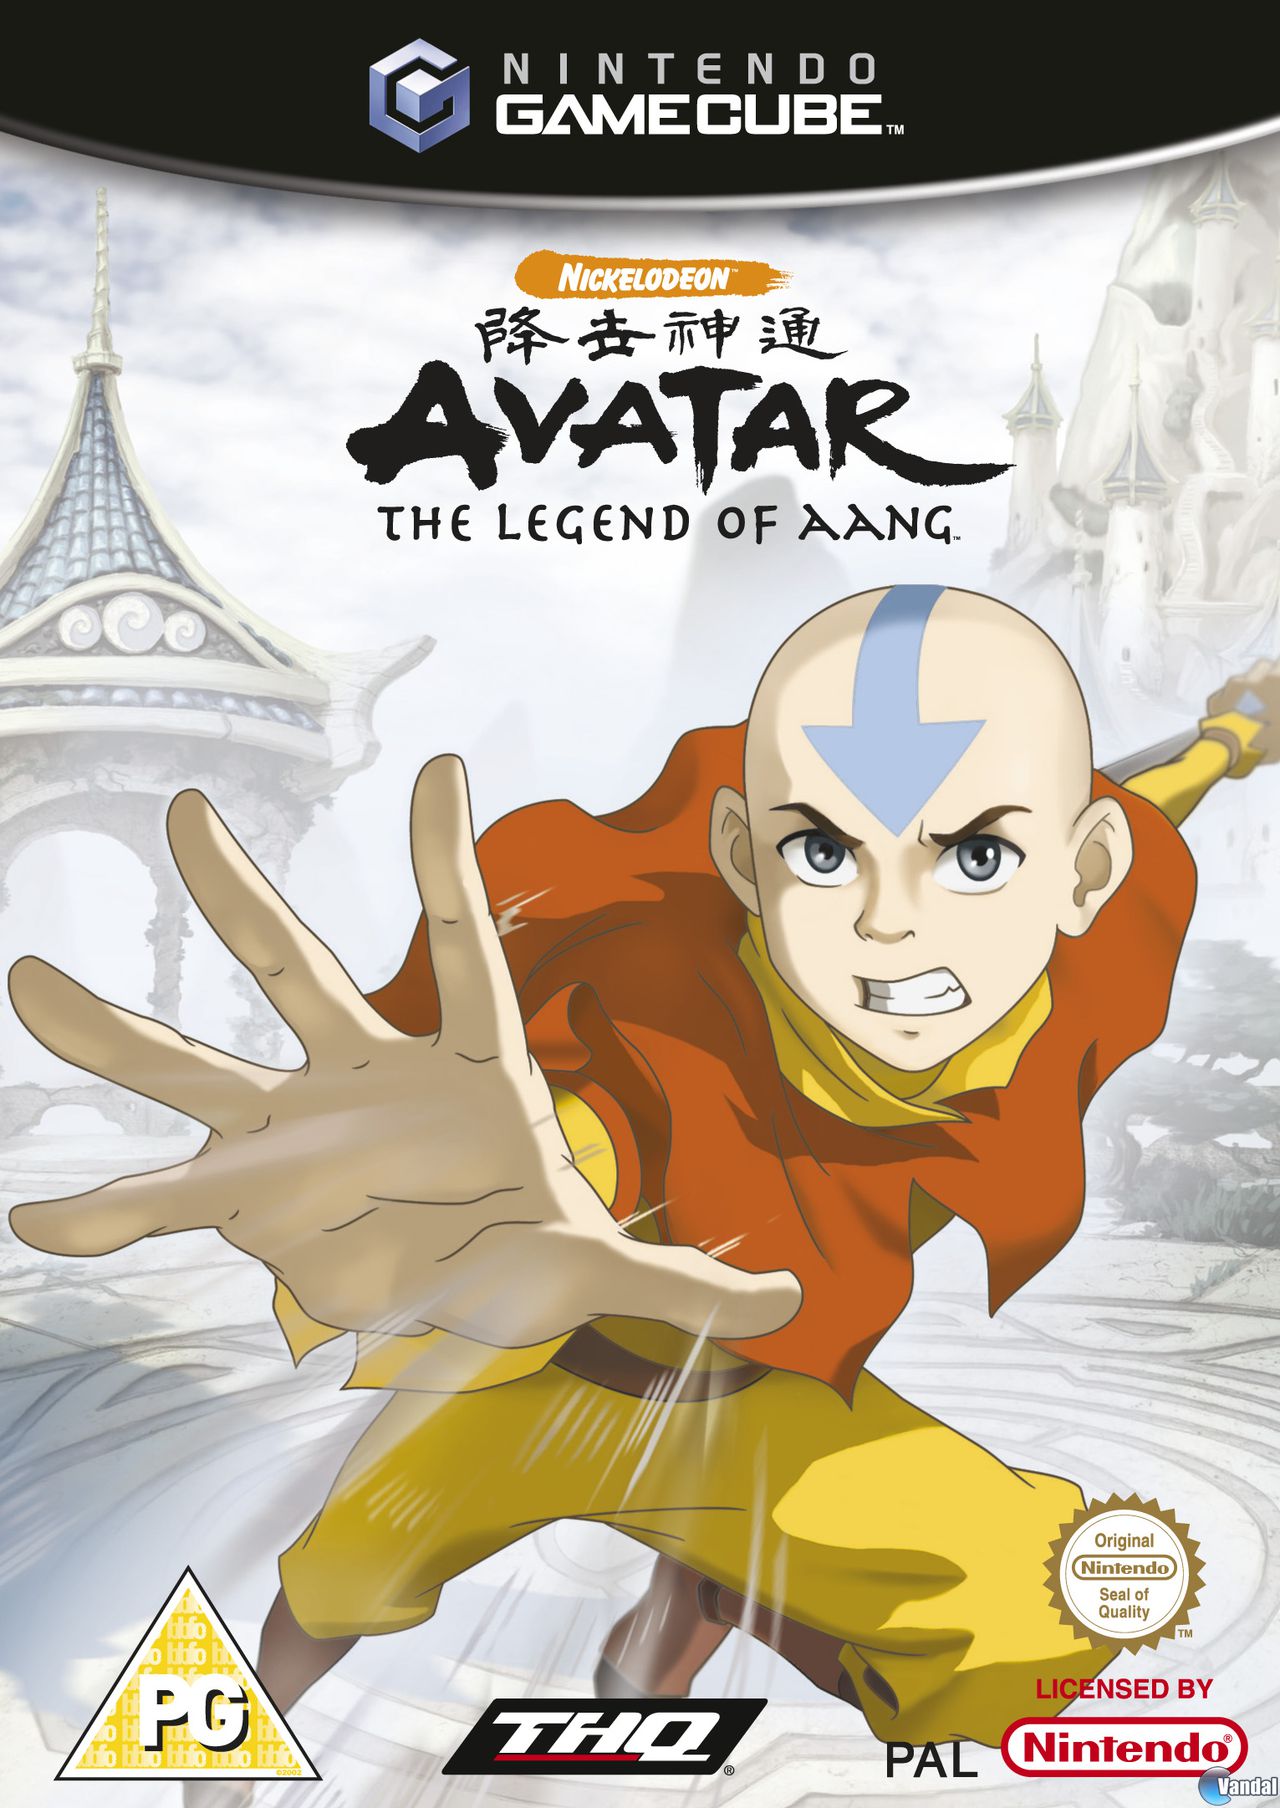 aang Avatar of the legend